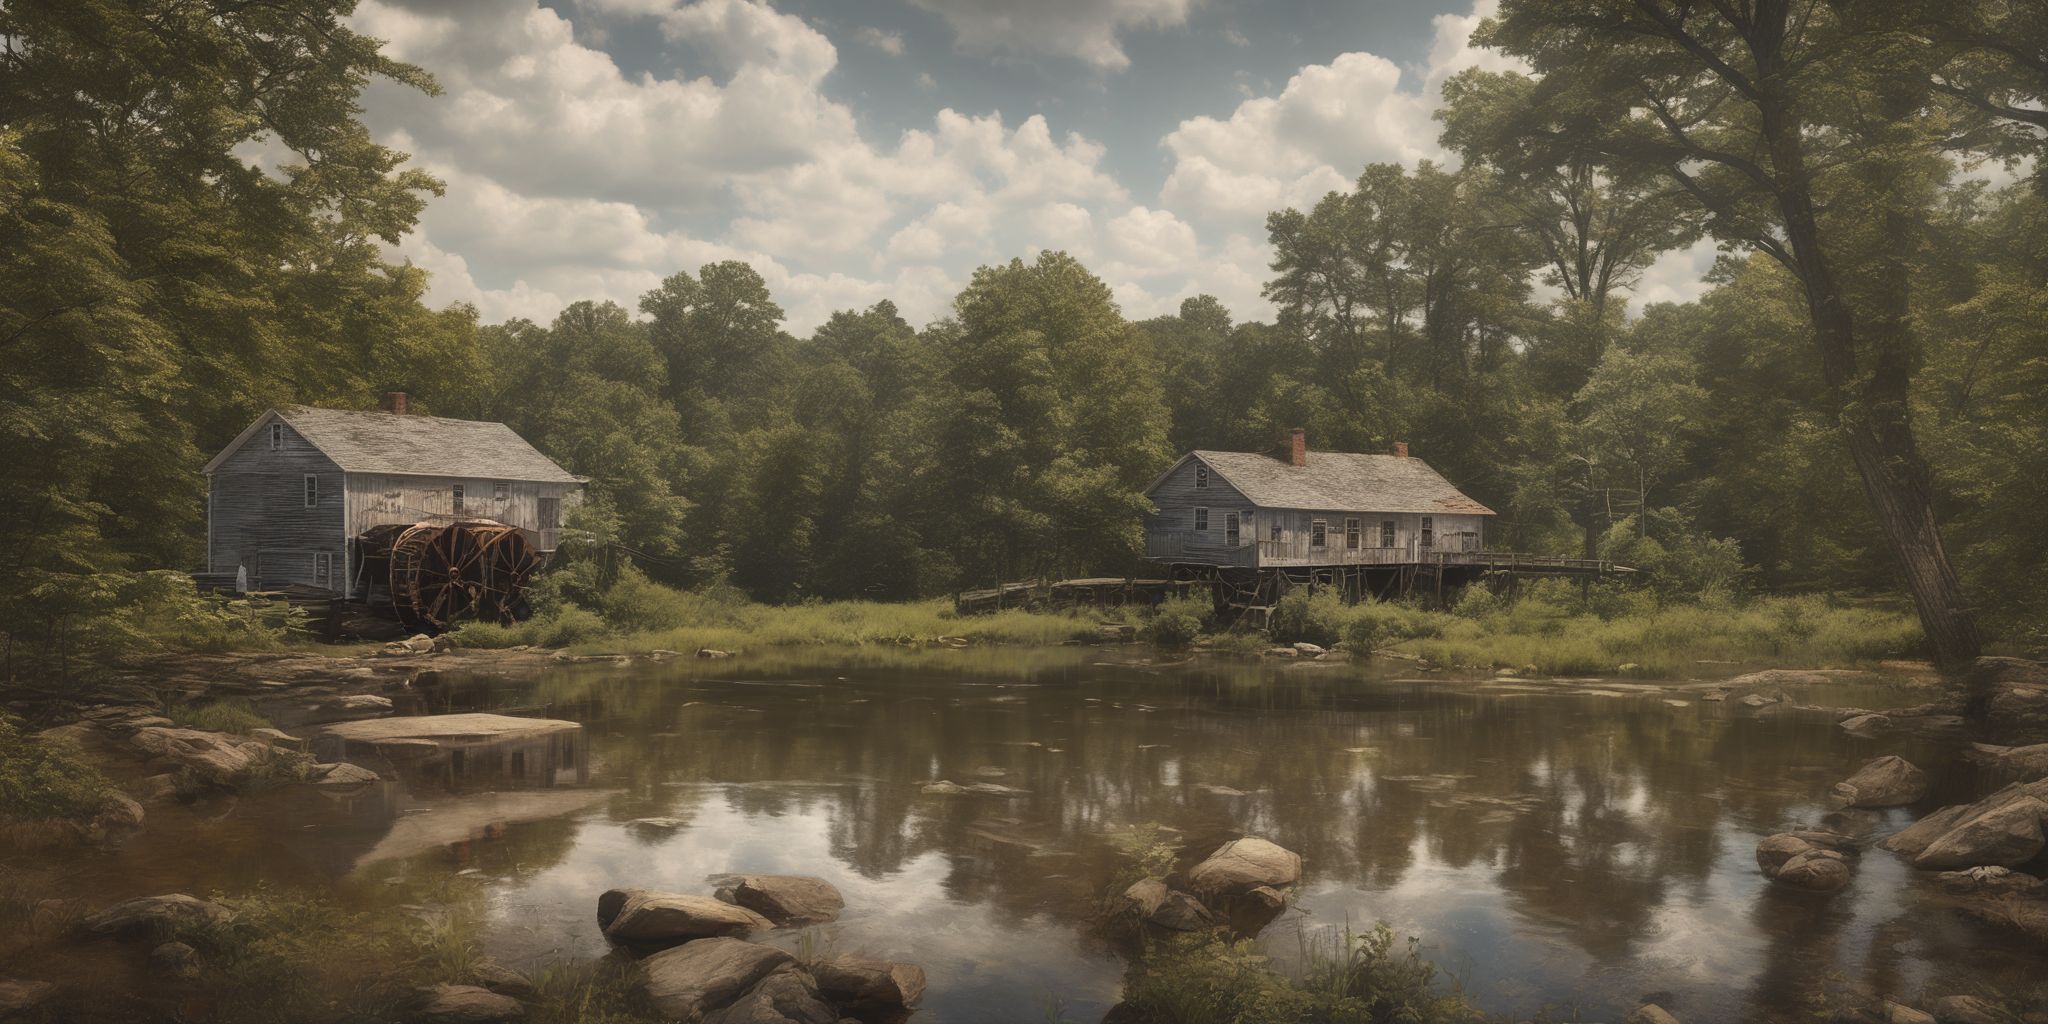 Virginia  in realistic, photographic style